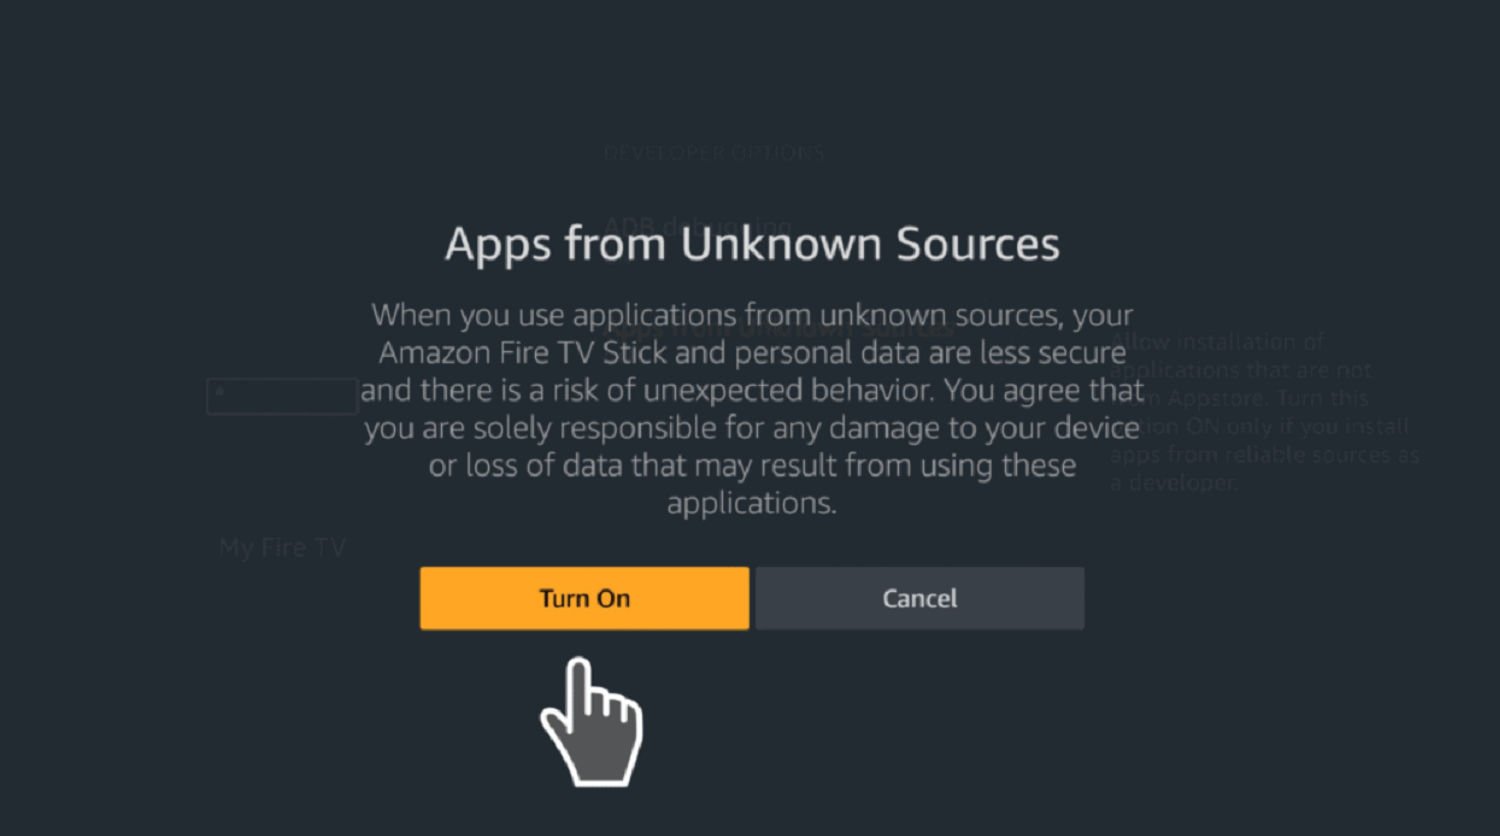 apps from unknown sources confirmation modal